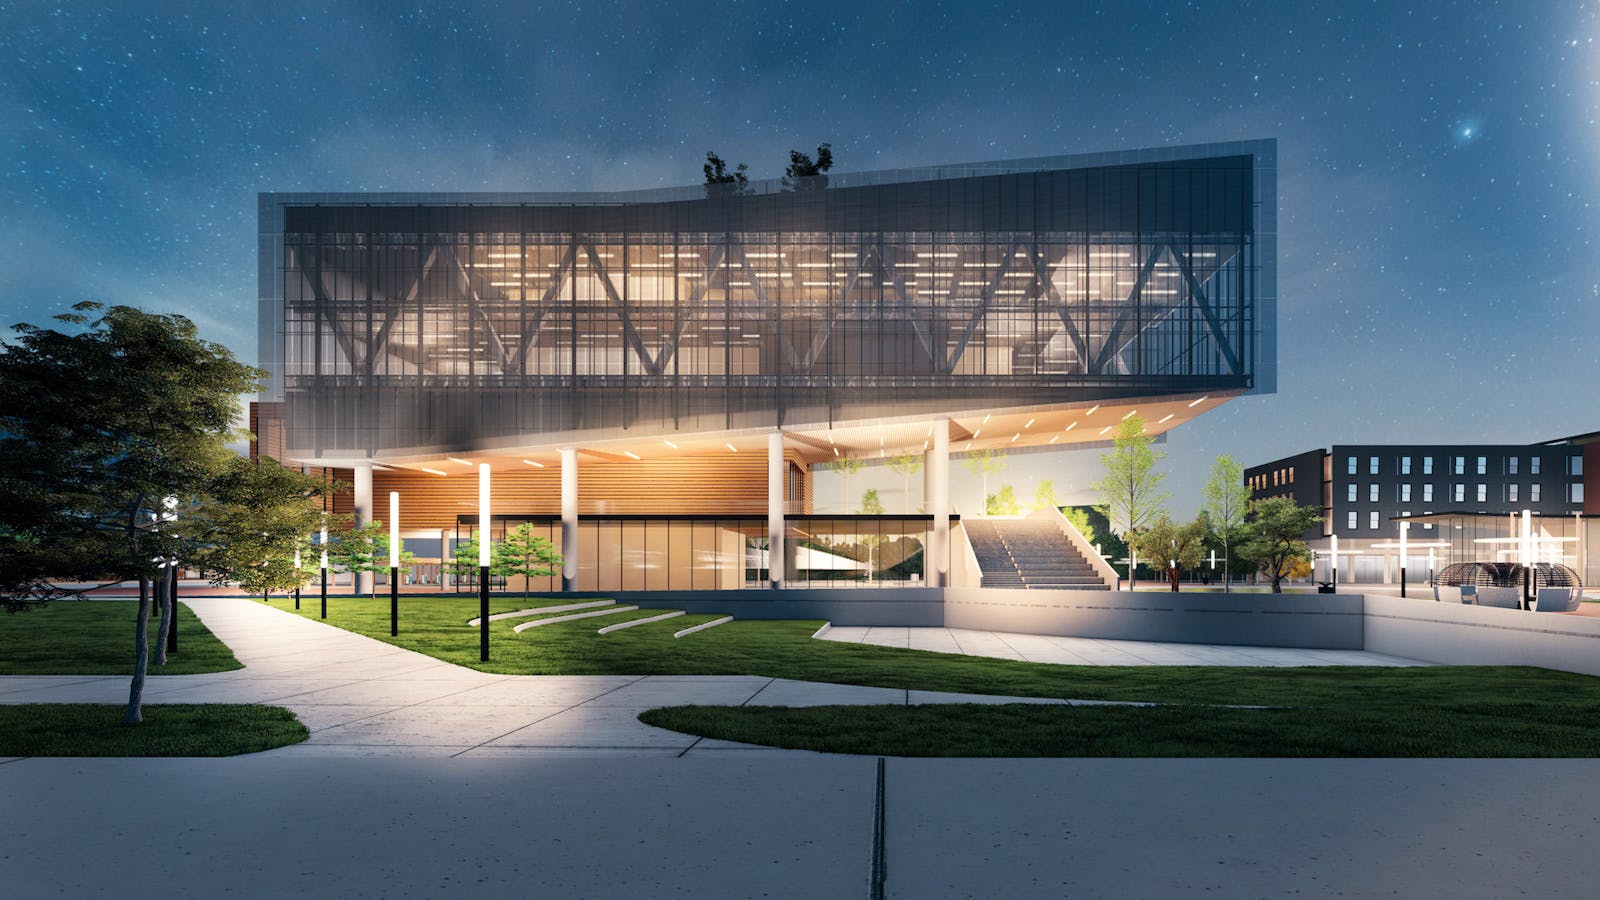 A rendering of the Propel Center, a tech-focused learning hub Apple is funding in Atlanta. Image provided by Apple.